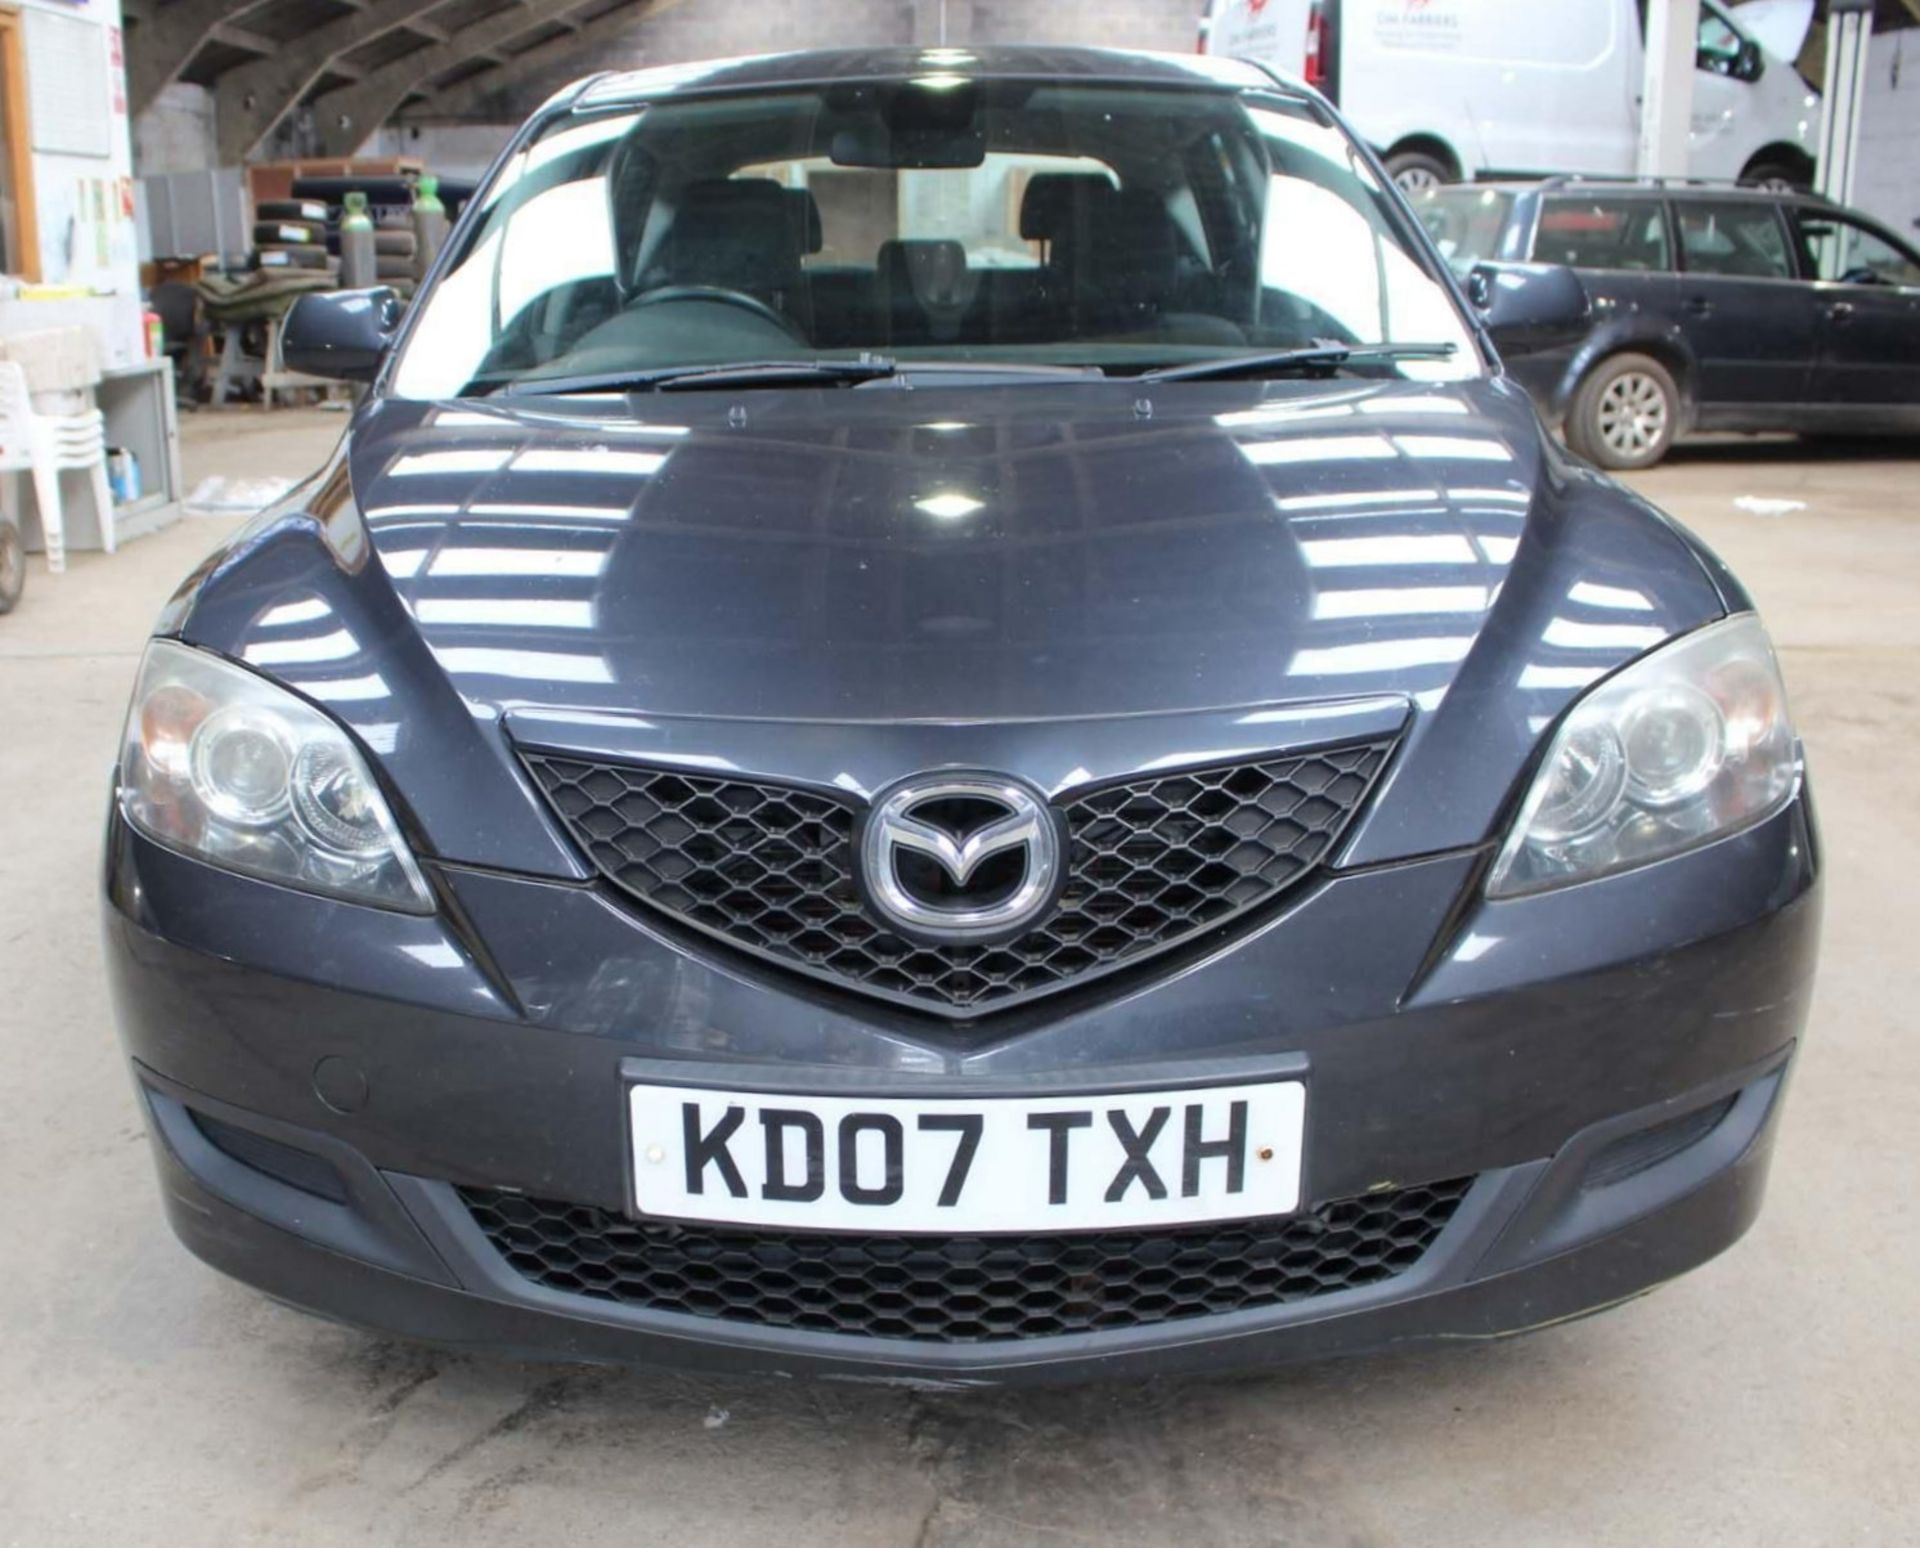 2007 Mazda3 1.6 TS2 5dr Hatchback - CL505 - NO VAT ON THE HAMMER - Location: Corby, Northamptonshire - Image 2 of 15